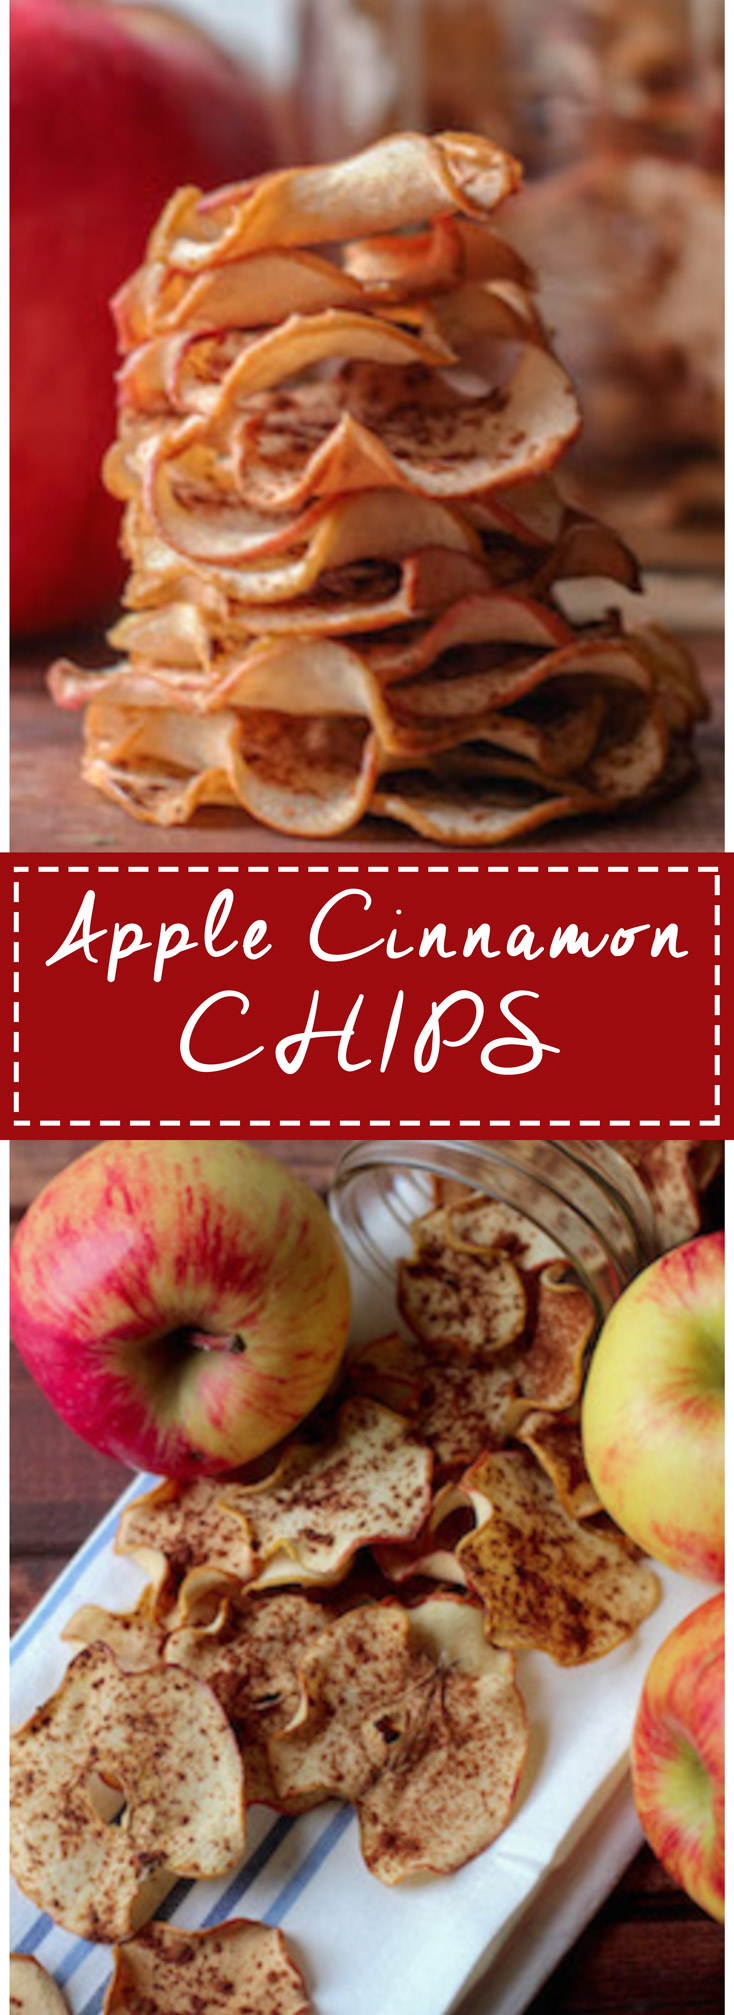 Apple Cinnamon Chips are SOOO easy to make! Perfect snack when you are craving something sweet and crunchy!